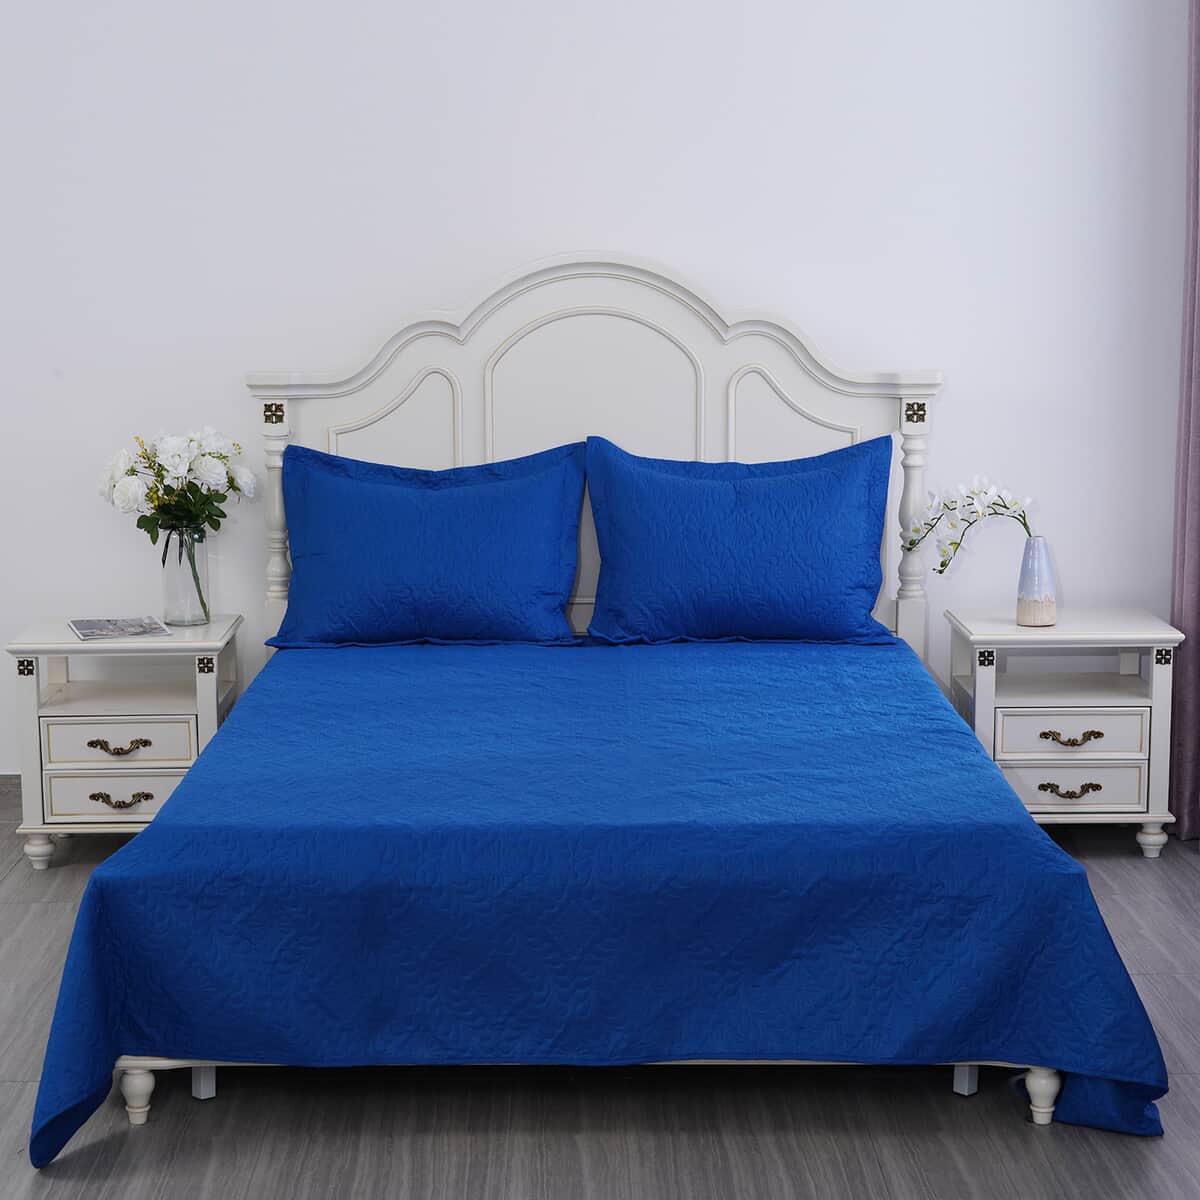 Homesmart 3 Pcs Solid Blue Pinsonic Quilt Bedding Set - Queen Size image number 1